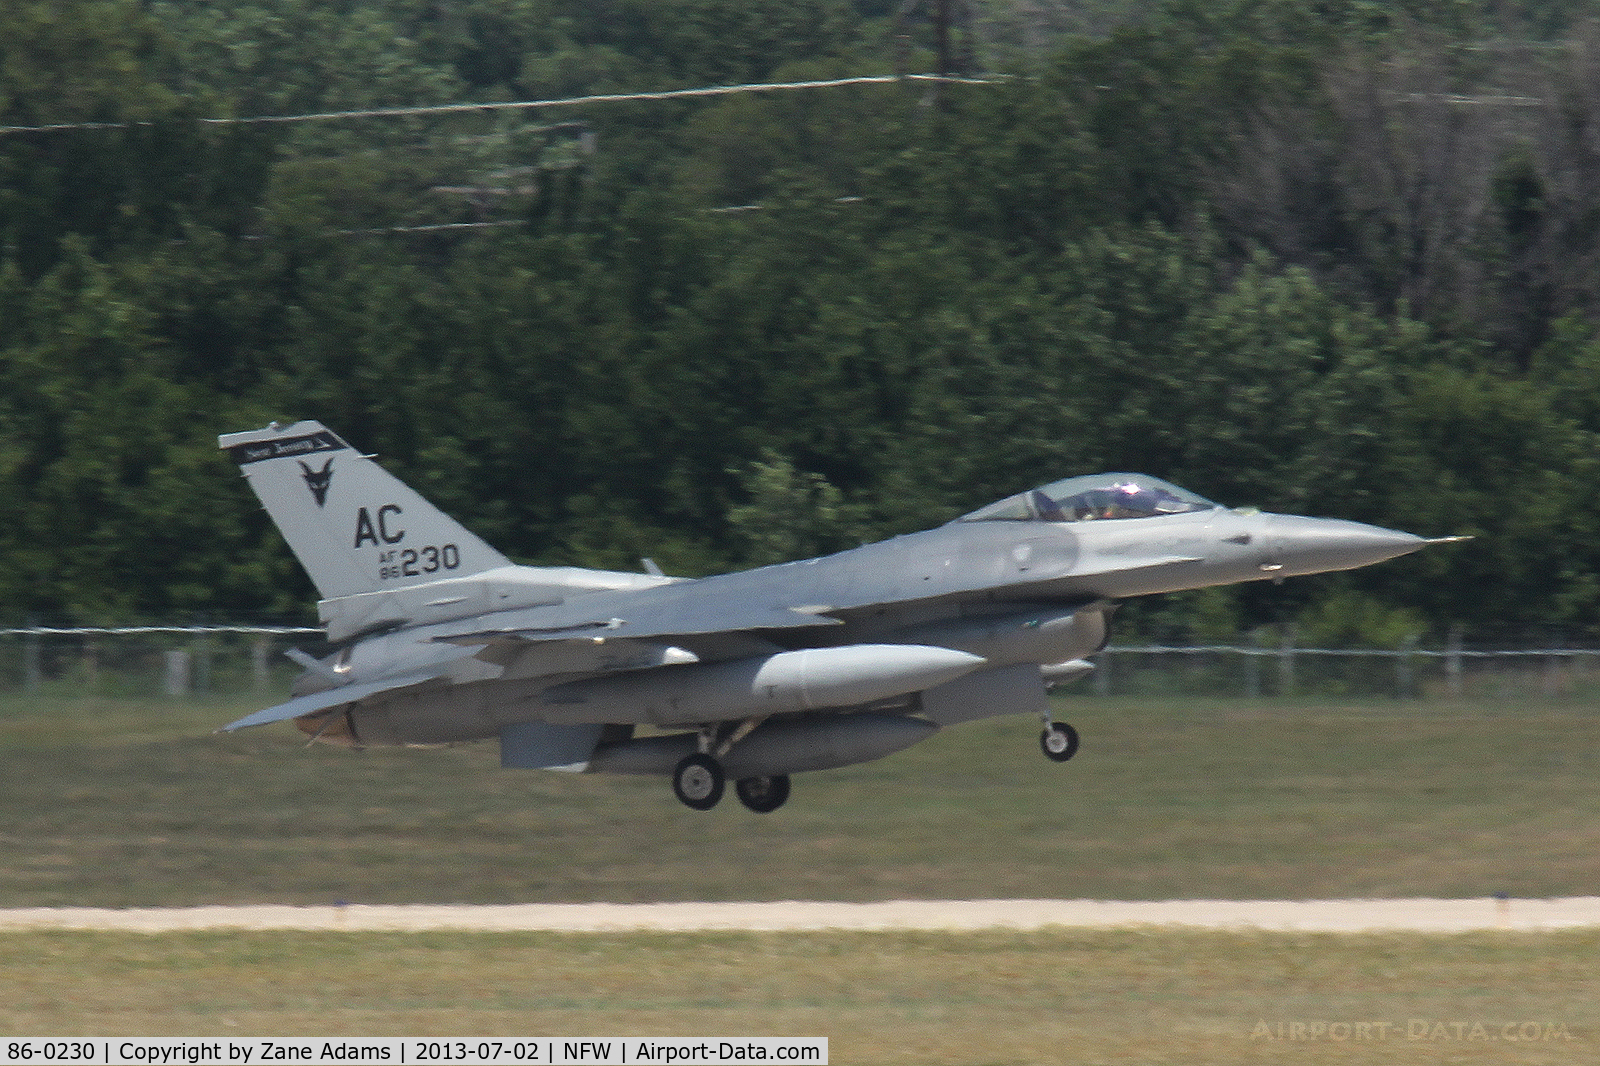 86-0230, 1986 General Dynamics F-16C Fighting Falcon C/N 5C-336a, Departing NAS Fort Worth